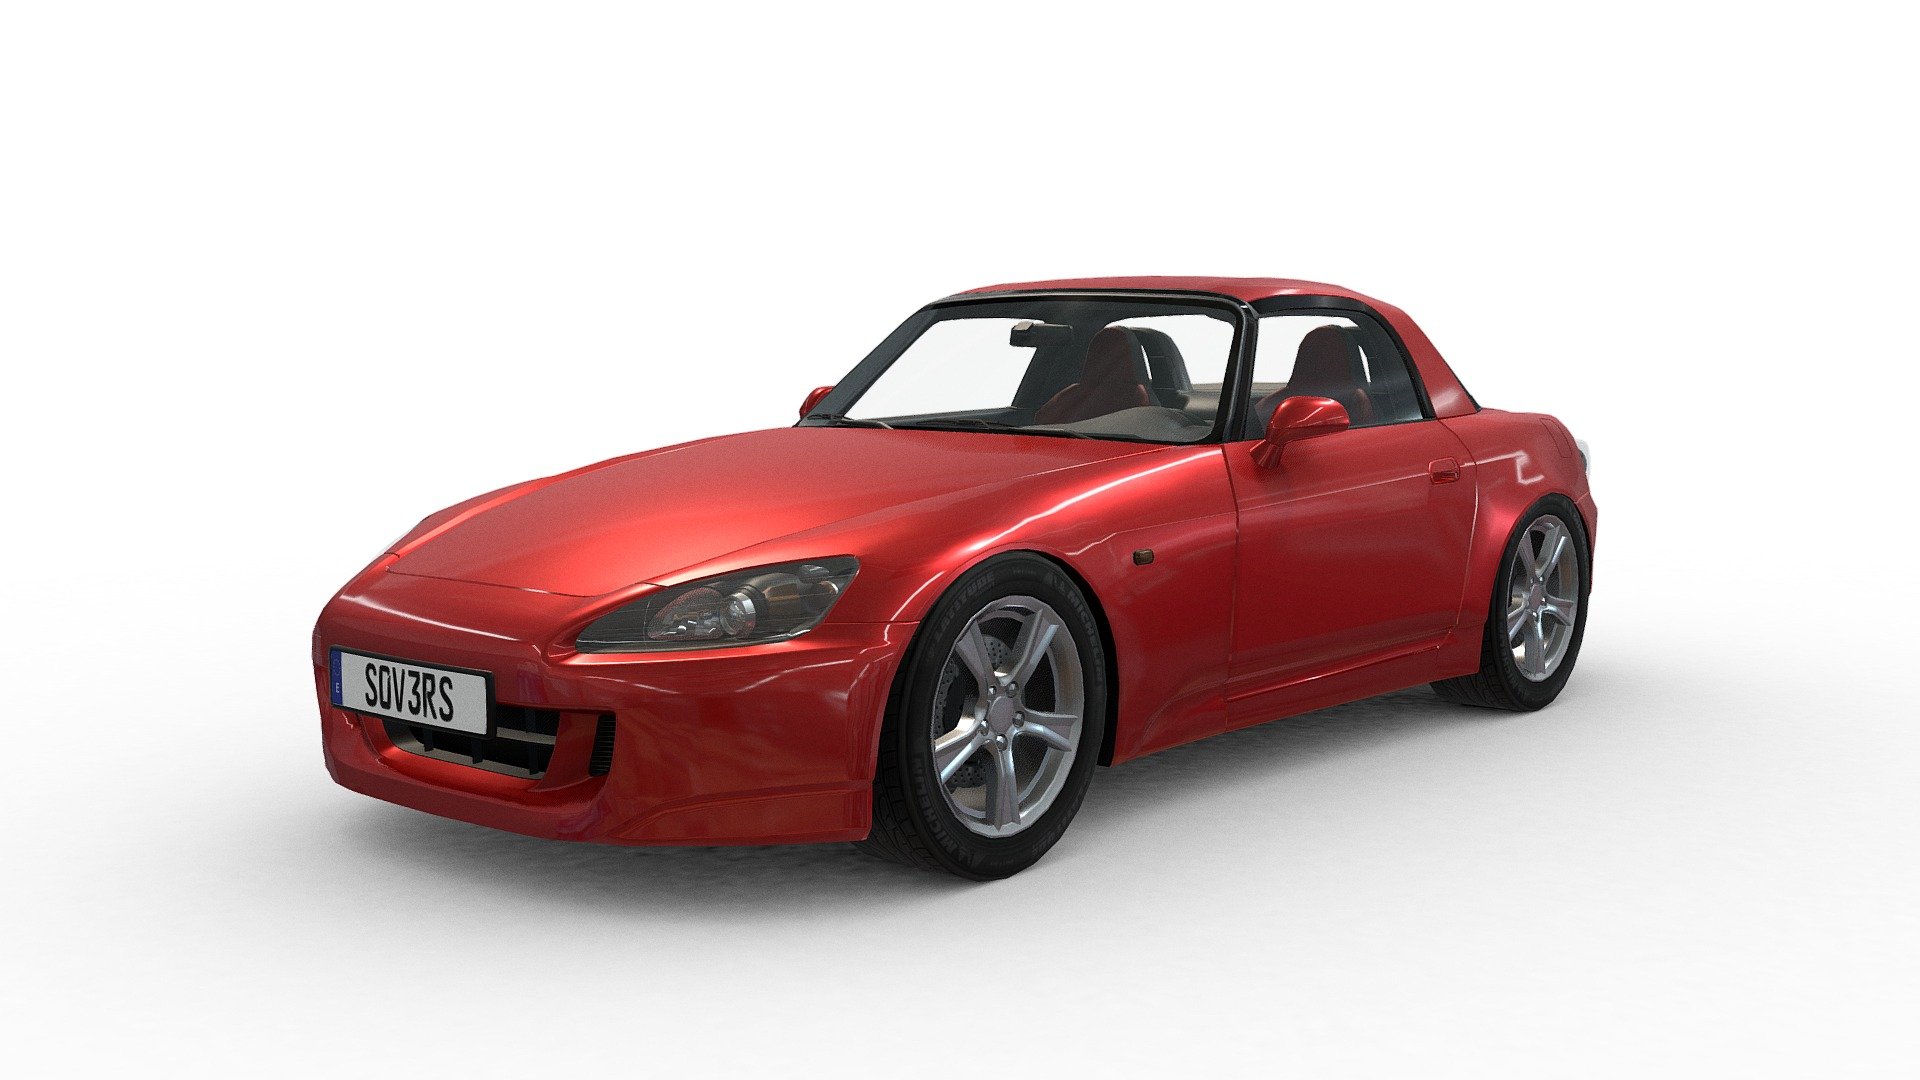 Commissioned work. Just one uv set with one single texture. Diffuse only. No AO bake or normal maps. Plain colors for the most parts except some details, interior labels and other things like gauges etc. Budget 22k polys (~40k tris) (counting only one rim/tyre) - Honda s2000 - 3D model by Sovers 3d model